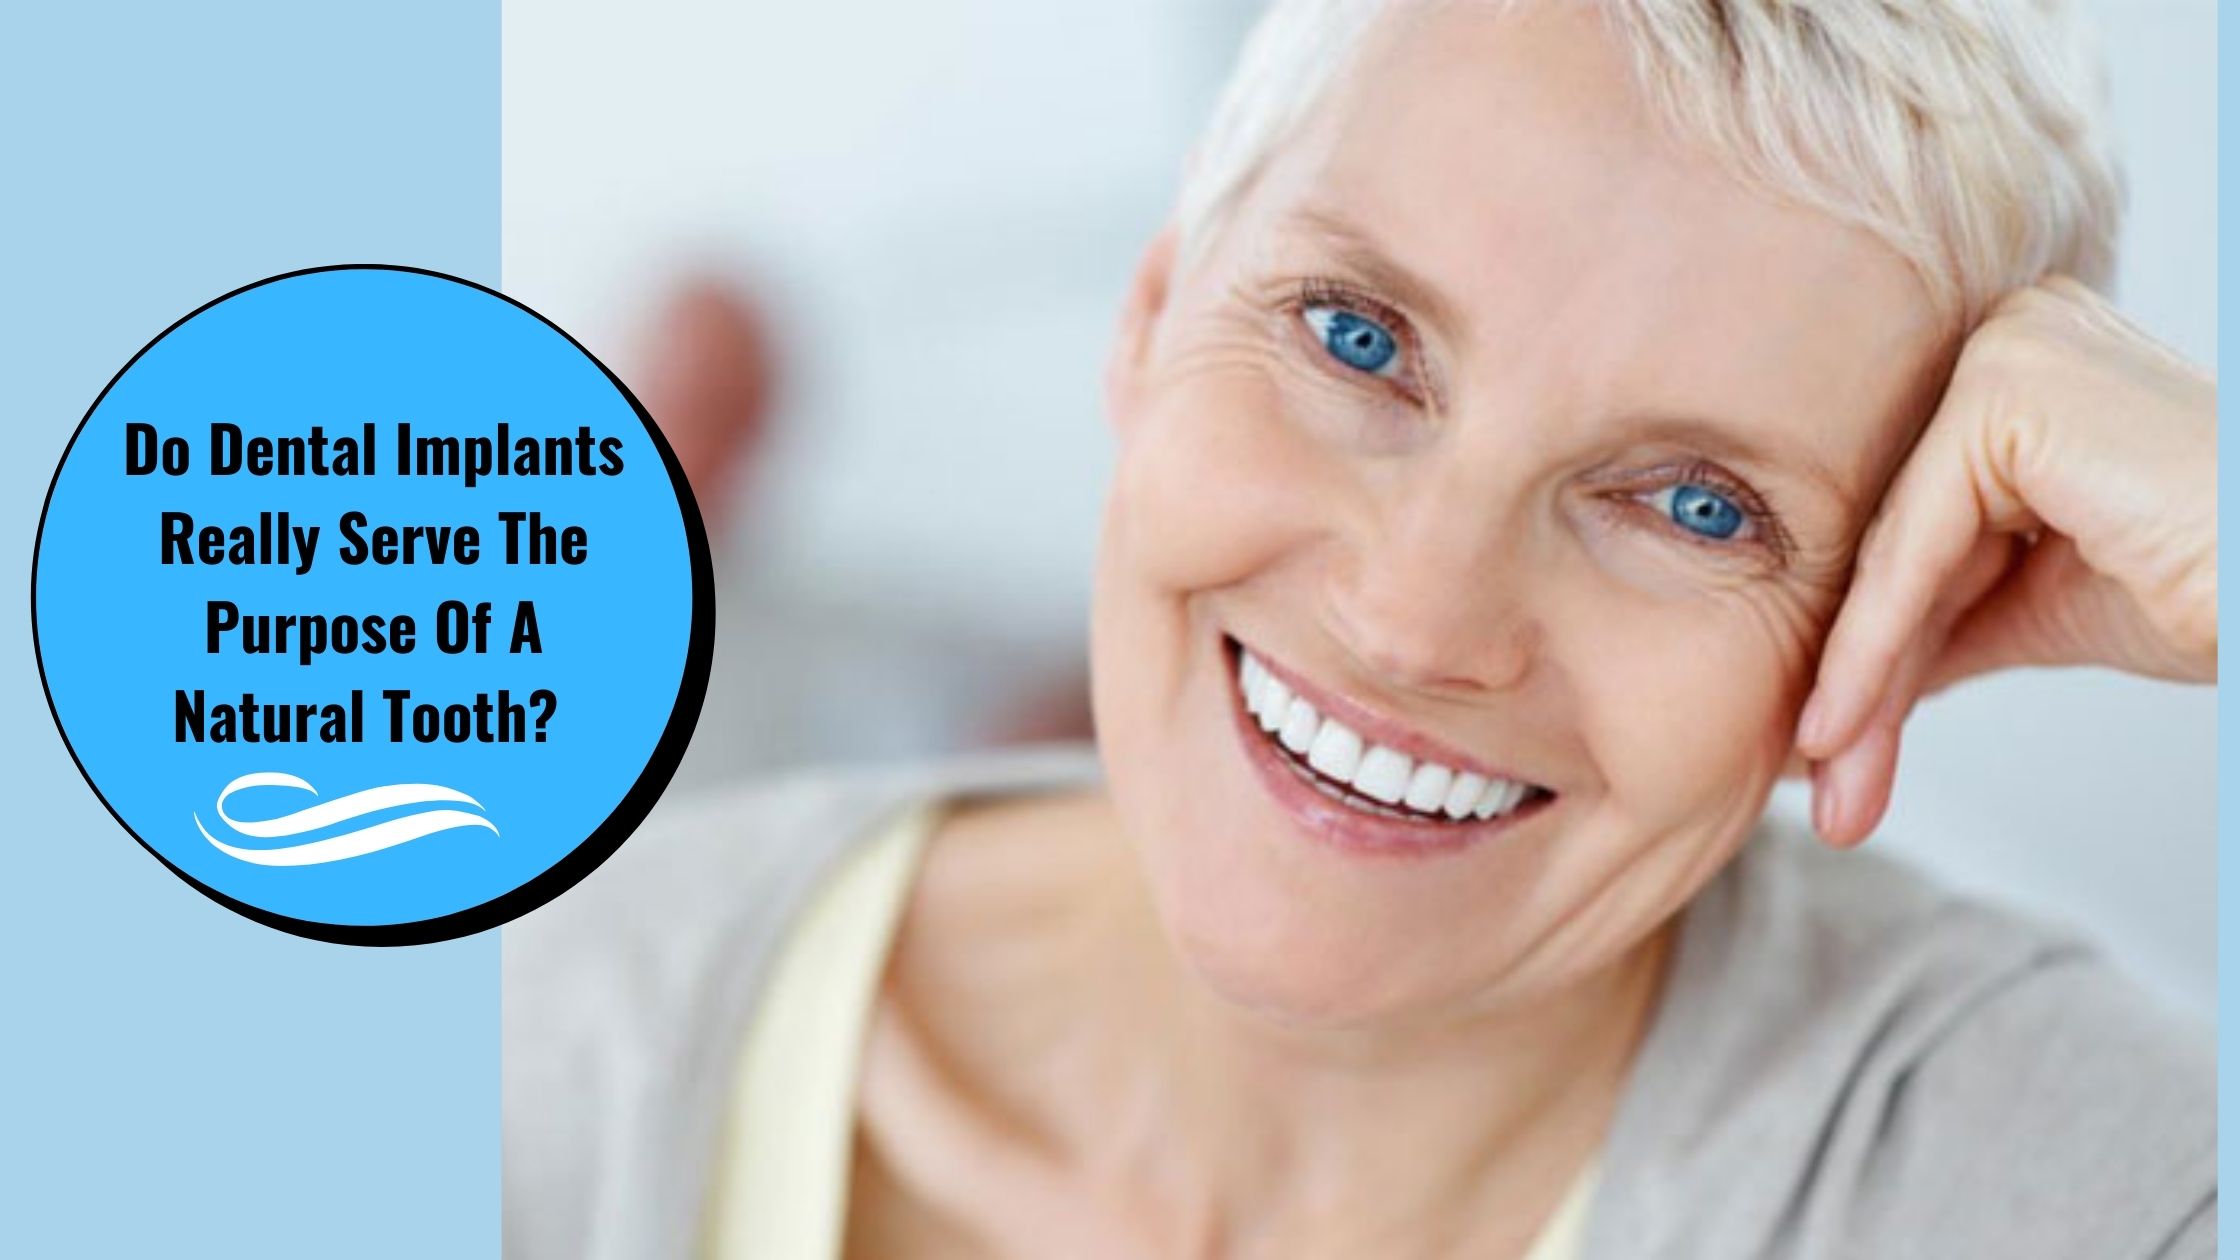 Do dental implants really serve the purpose of a natural tooth